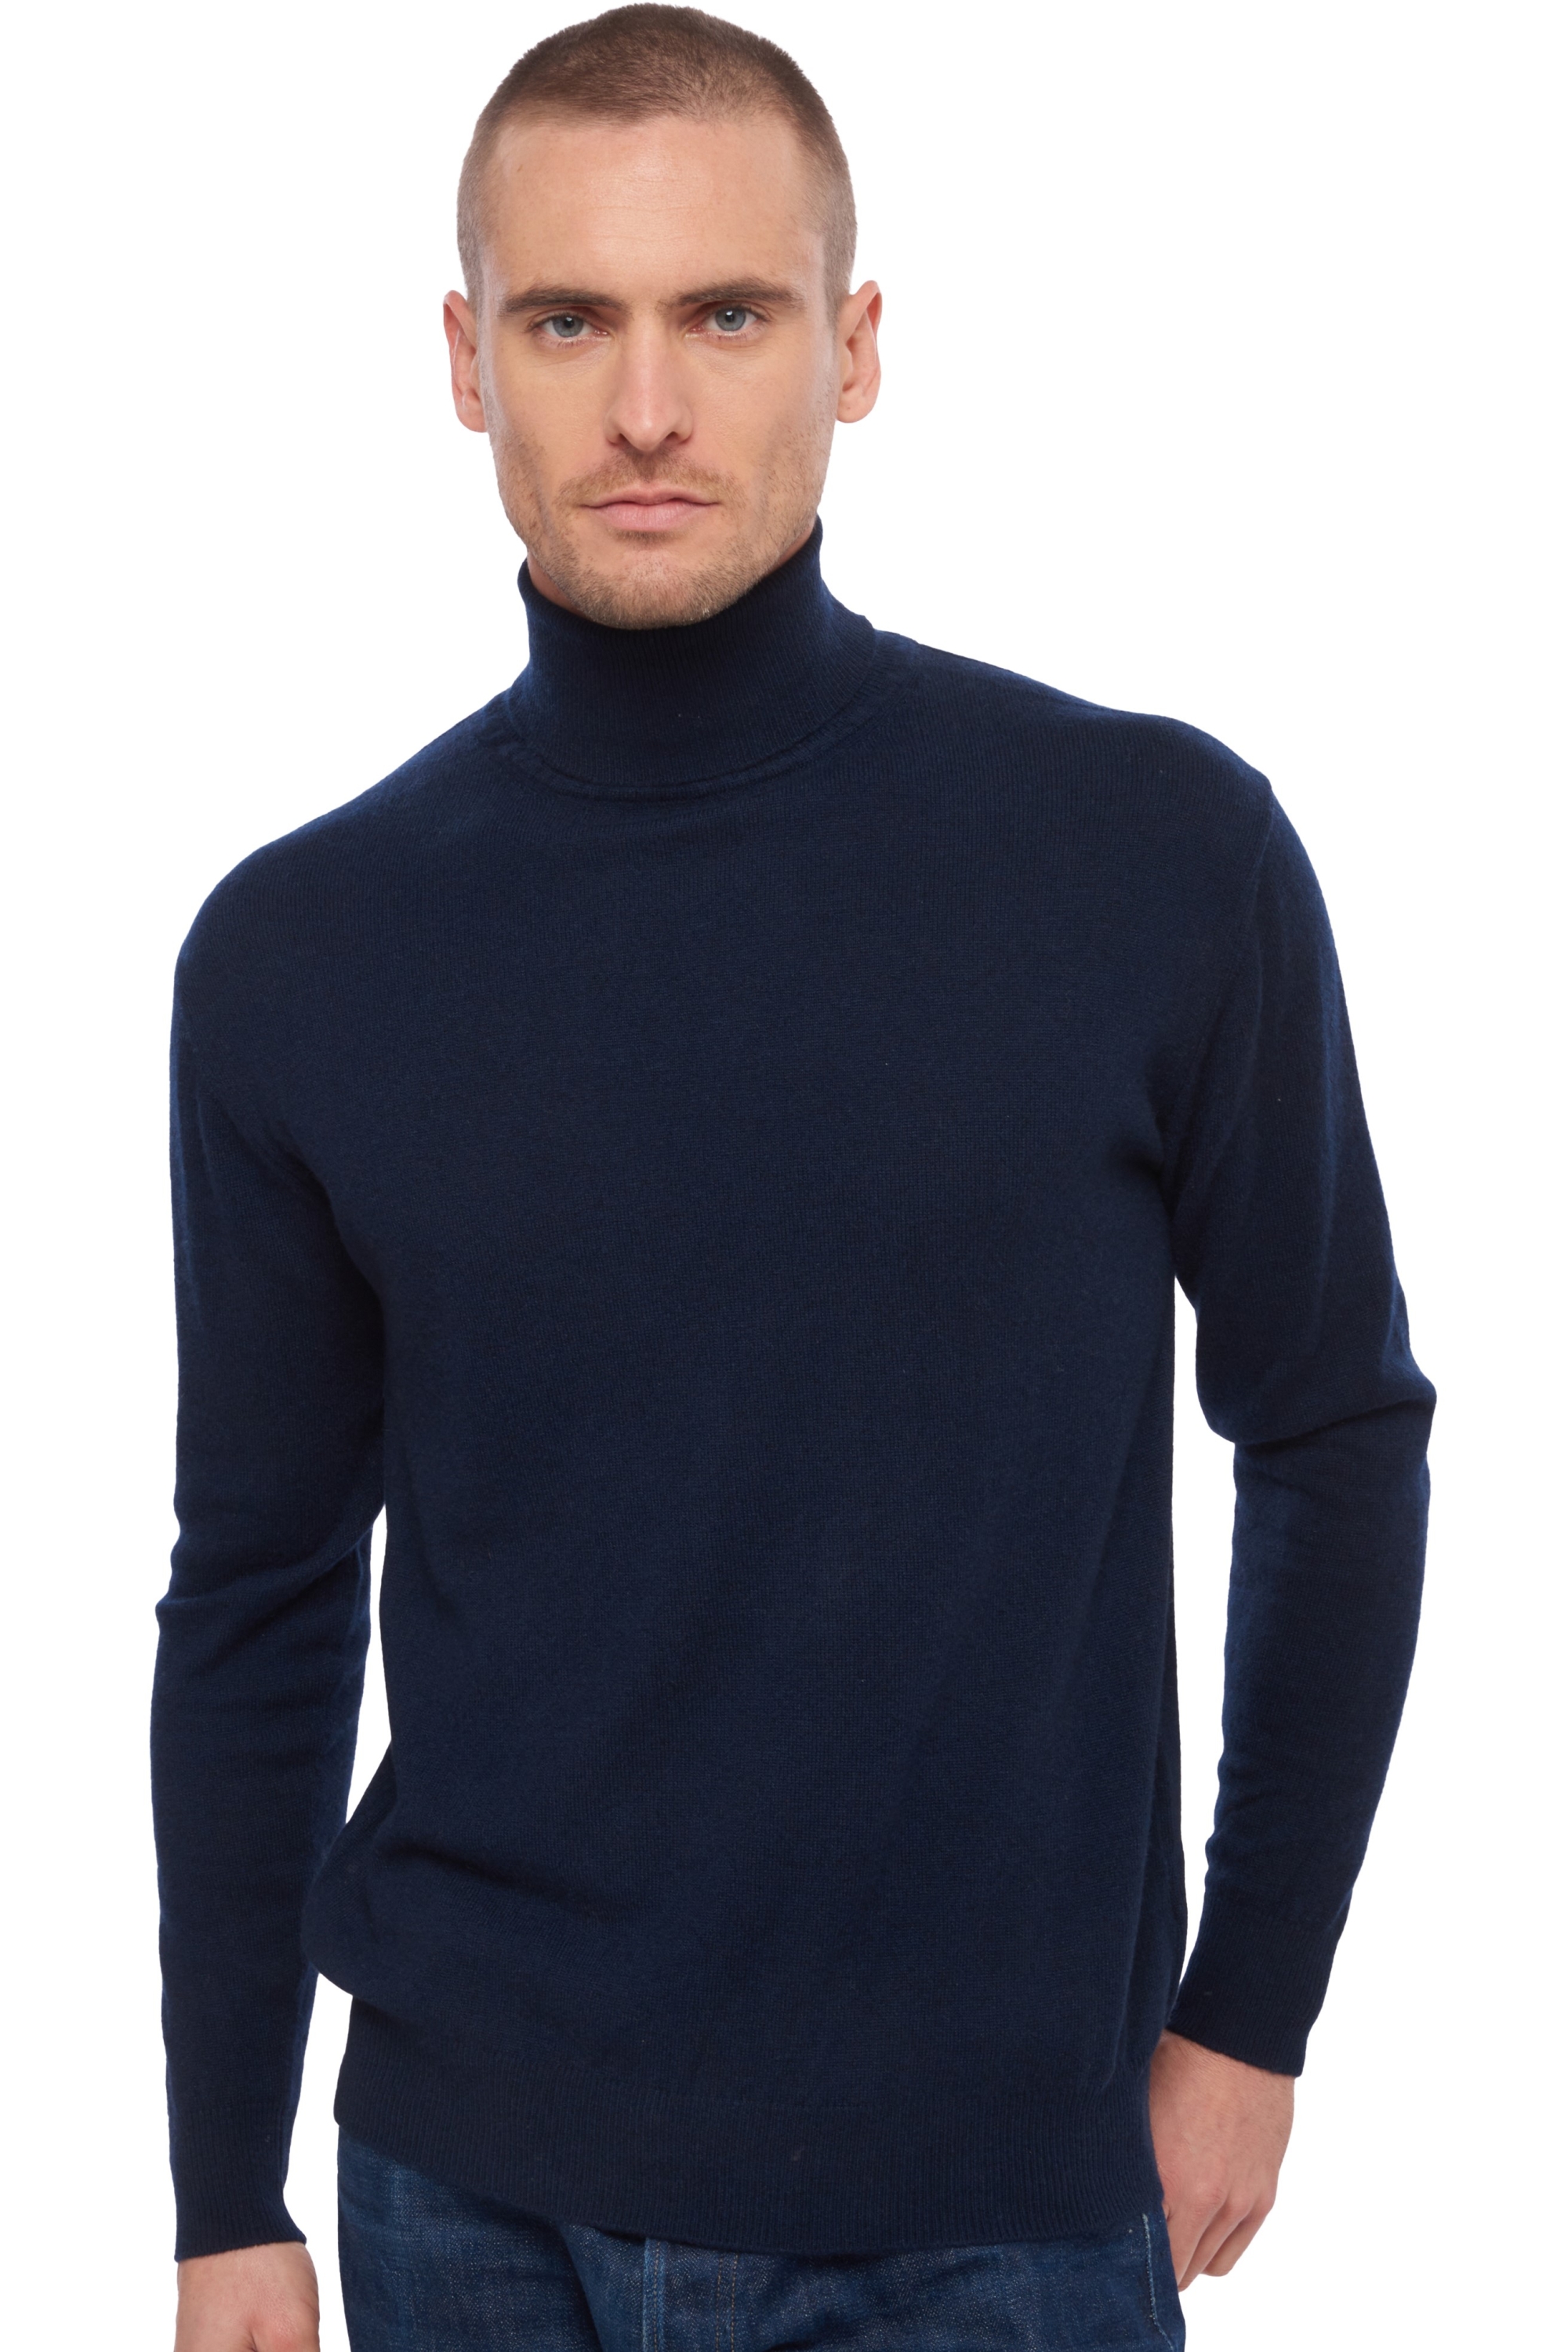 Cachemire pull homme col roule edgar marine fonce xs